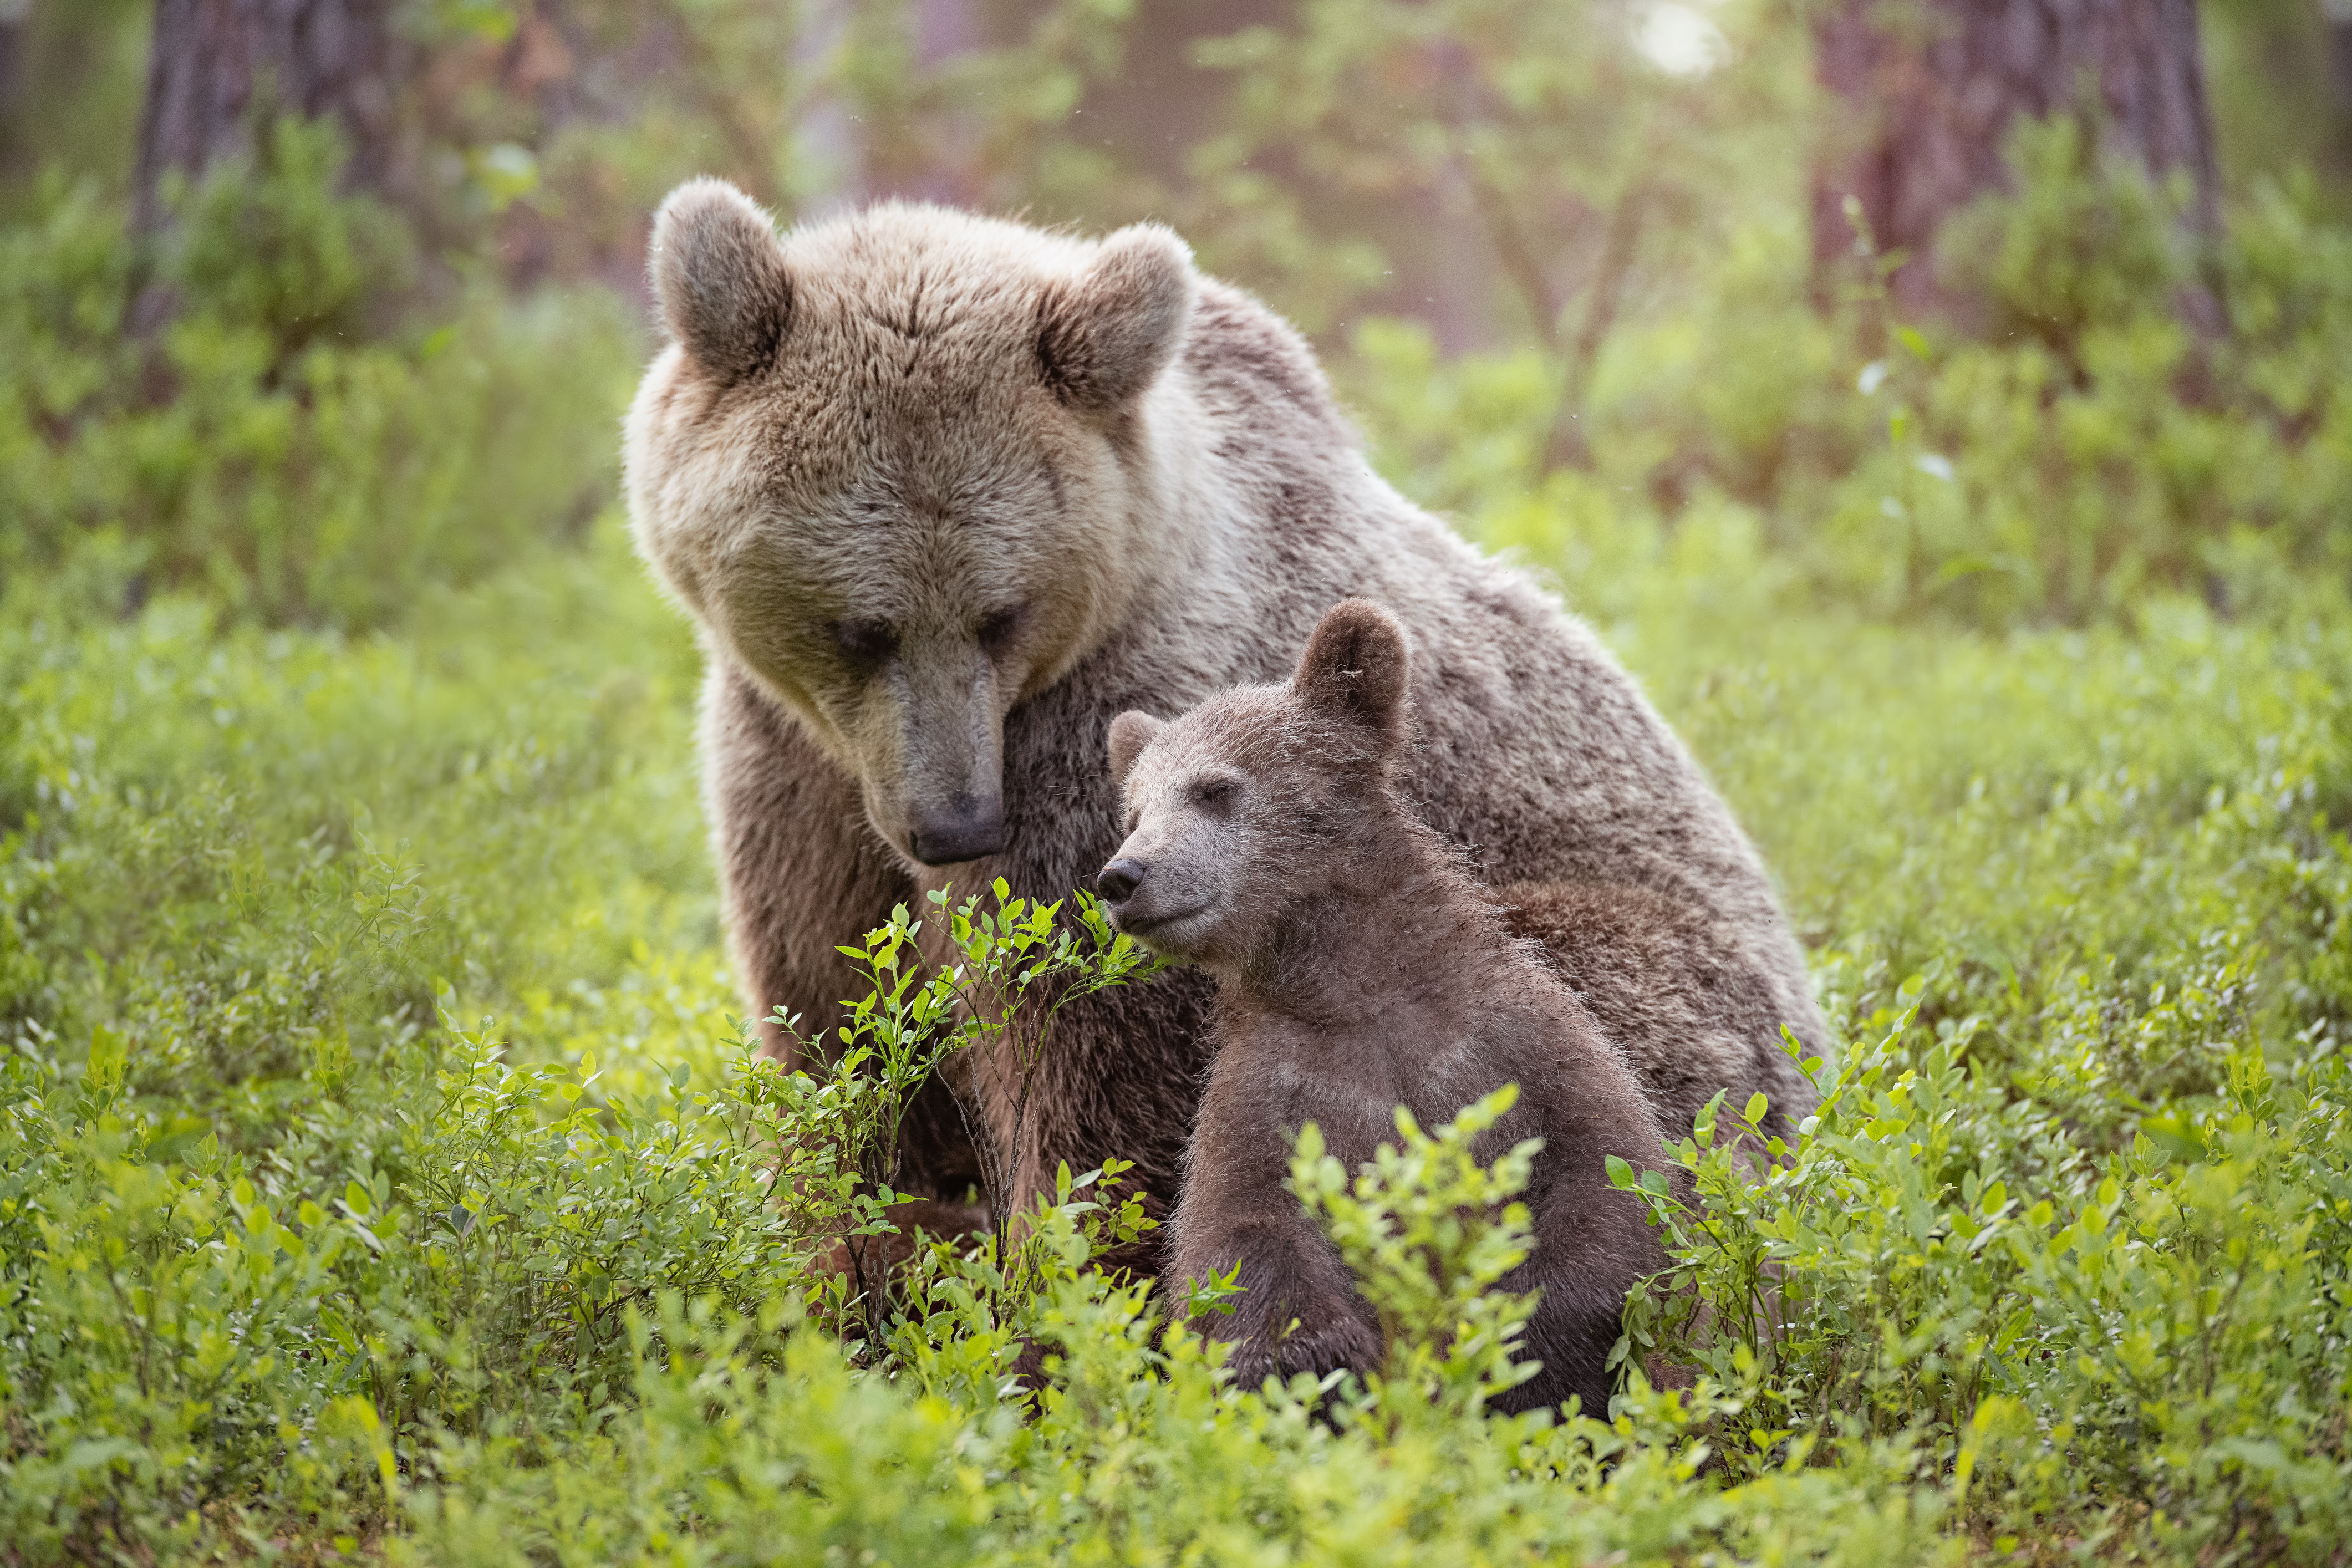 Bear cub leaning on its mother